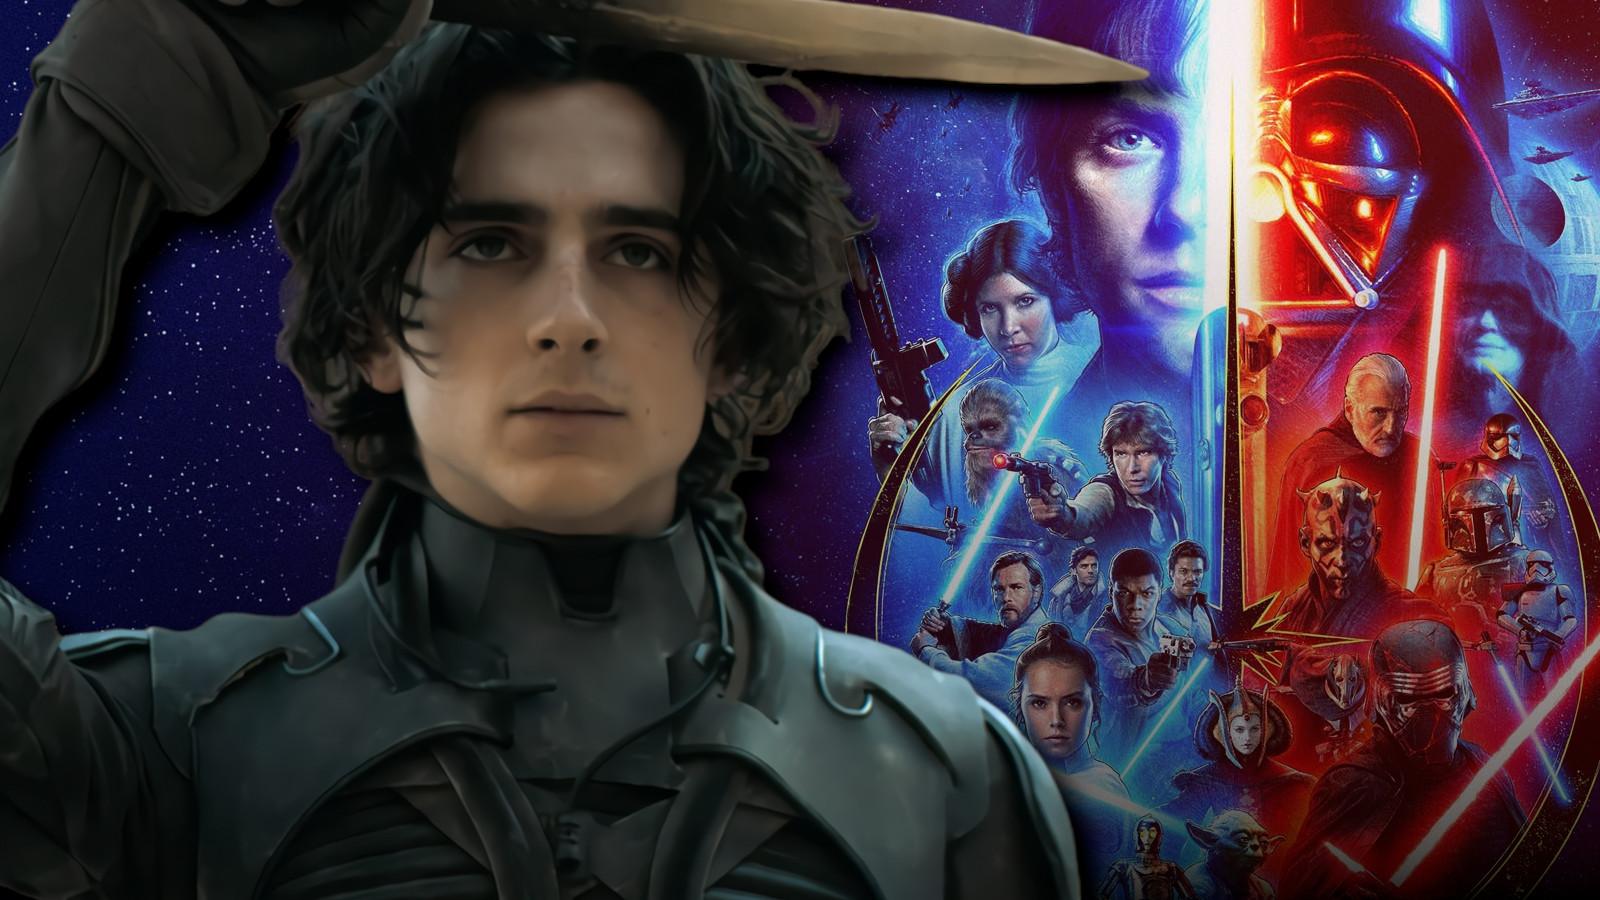 Paul Atreides (Timothee Chalamet) from Dune with the Star Wars cast behind ihim.